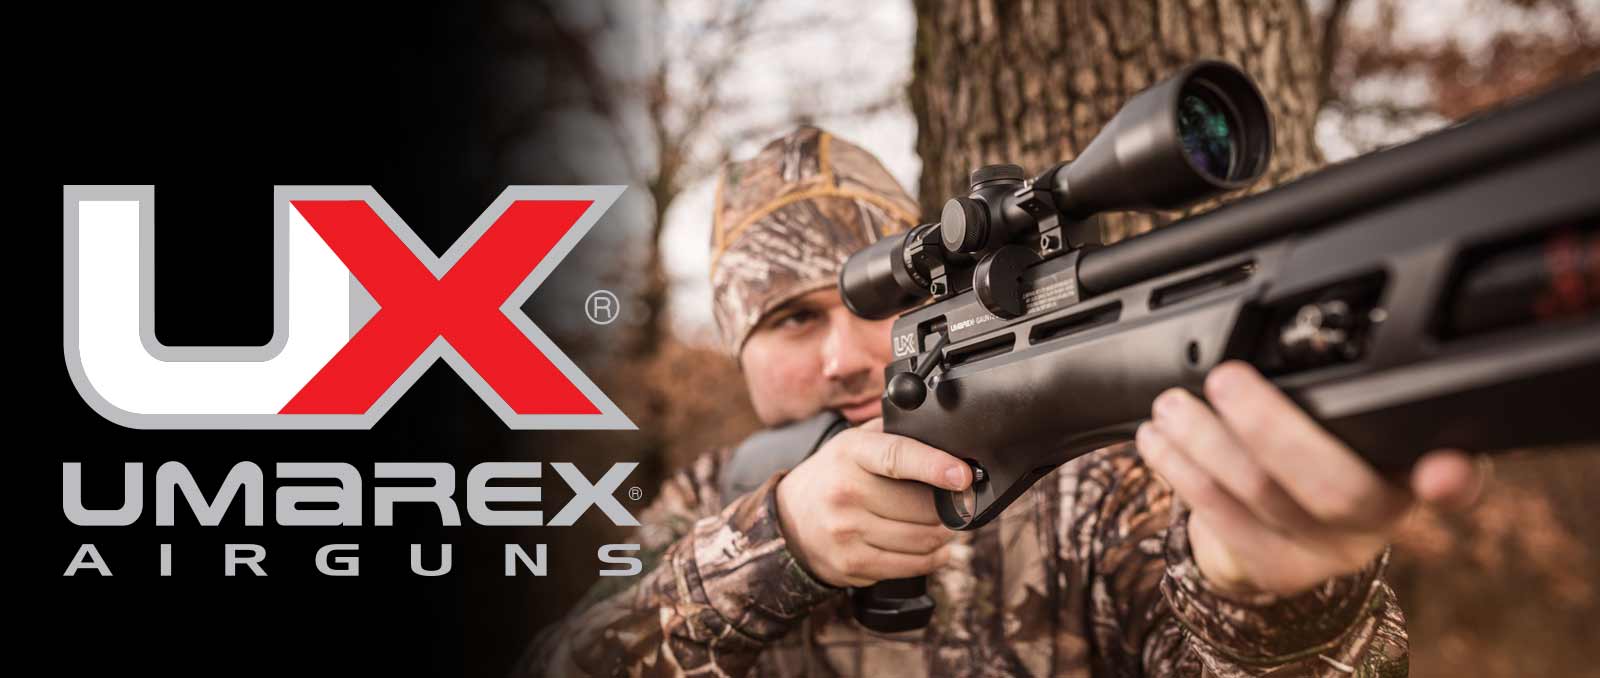 Umarex has just about any type of air gun you want